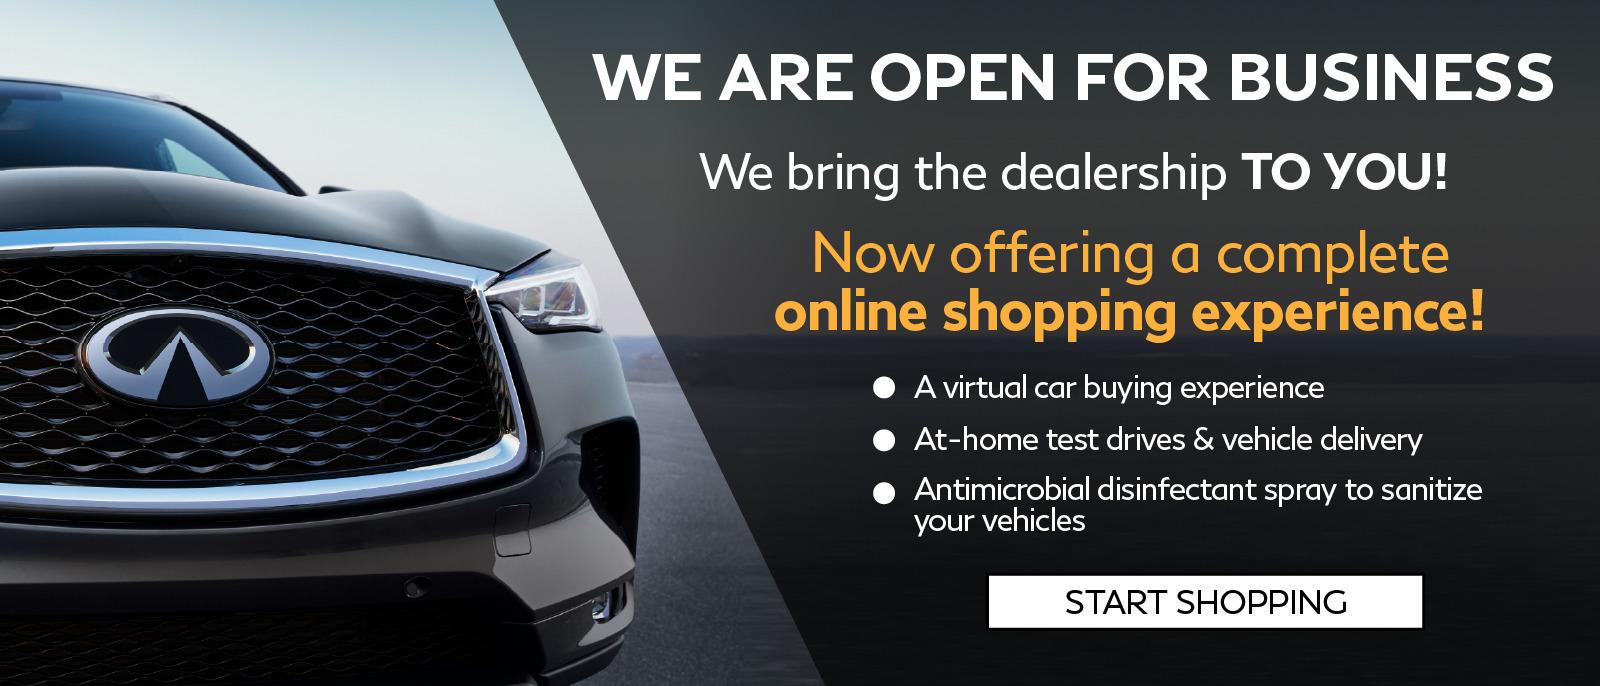 Clear Lake INFINITI is now offering a complete online shopping experience! Click to start shopping.